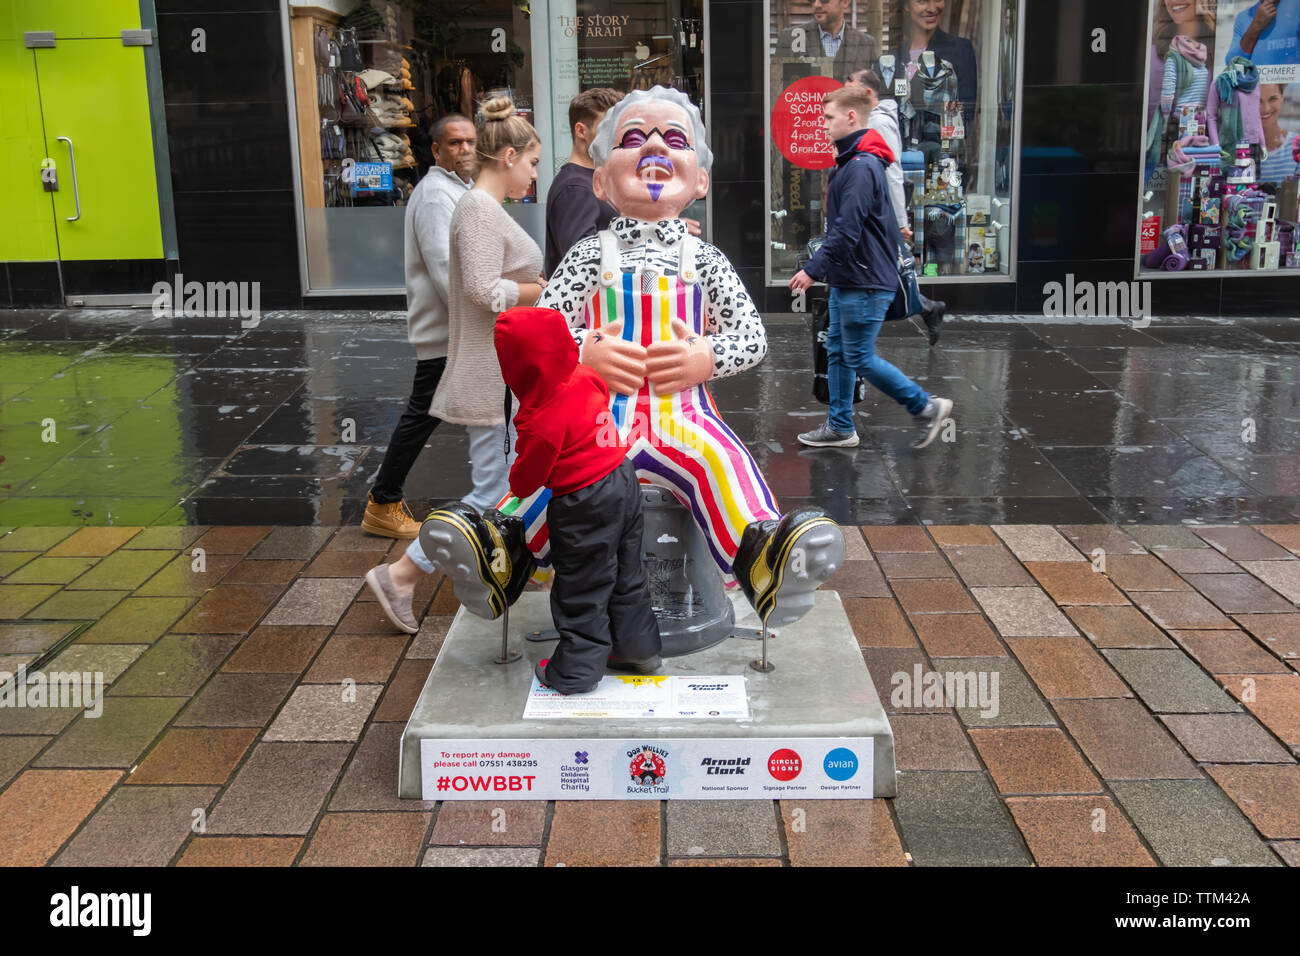 Glasgow, Scotland, UK. 17th June, 2019. Oor Billy, created by Robert Stevenson. This statue is a tribute to Glasgow comedy legend Billy Connolly. It depicts his life from his early days working in the Glasgow shipyards, to his boots from the 1970's and dungarees from the 1980's. His shirt is based on his appearance in 'An audience with...' from 1985. his purple beard and moustache from the early noughties and the purple tined glasses he wears today. The sculpture is part of Oor Wullie’s BIG Bucket Trail. Credit: Skully/Alamy Live News Stock Photo